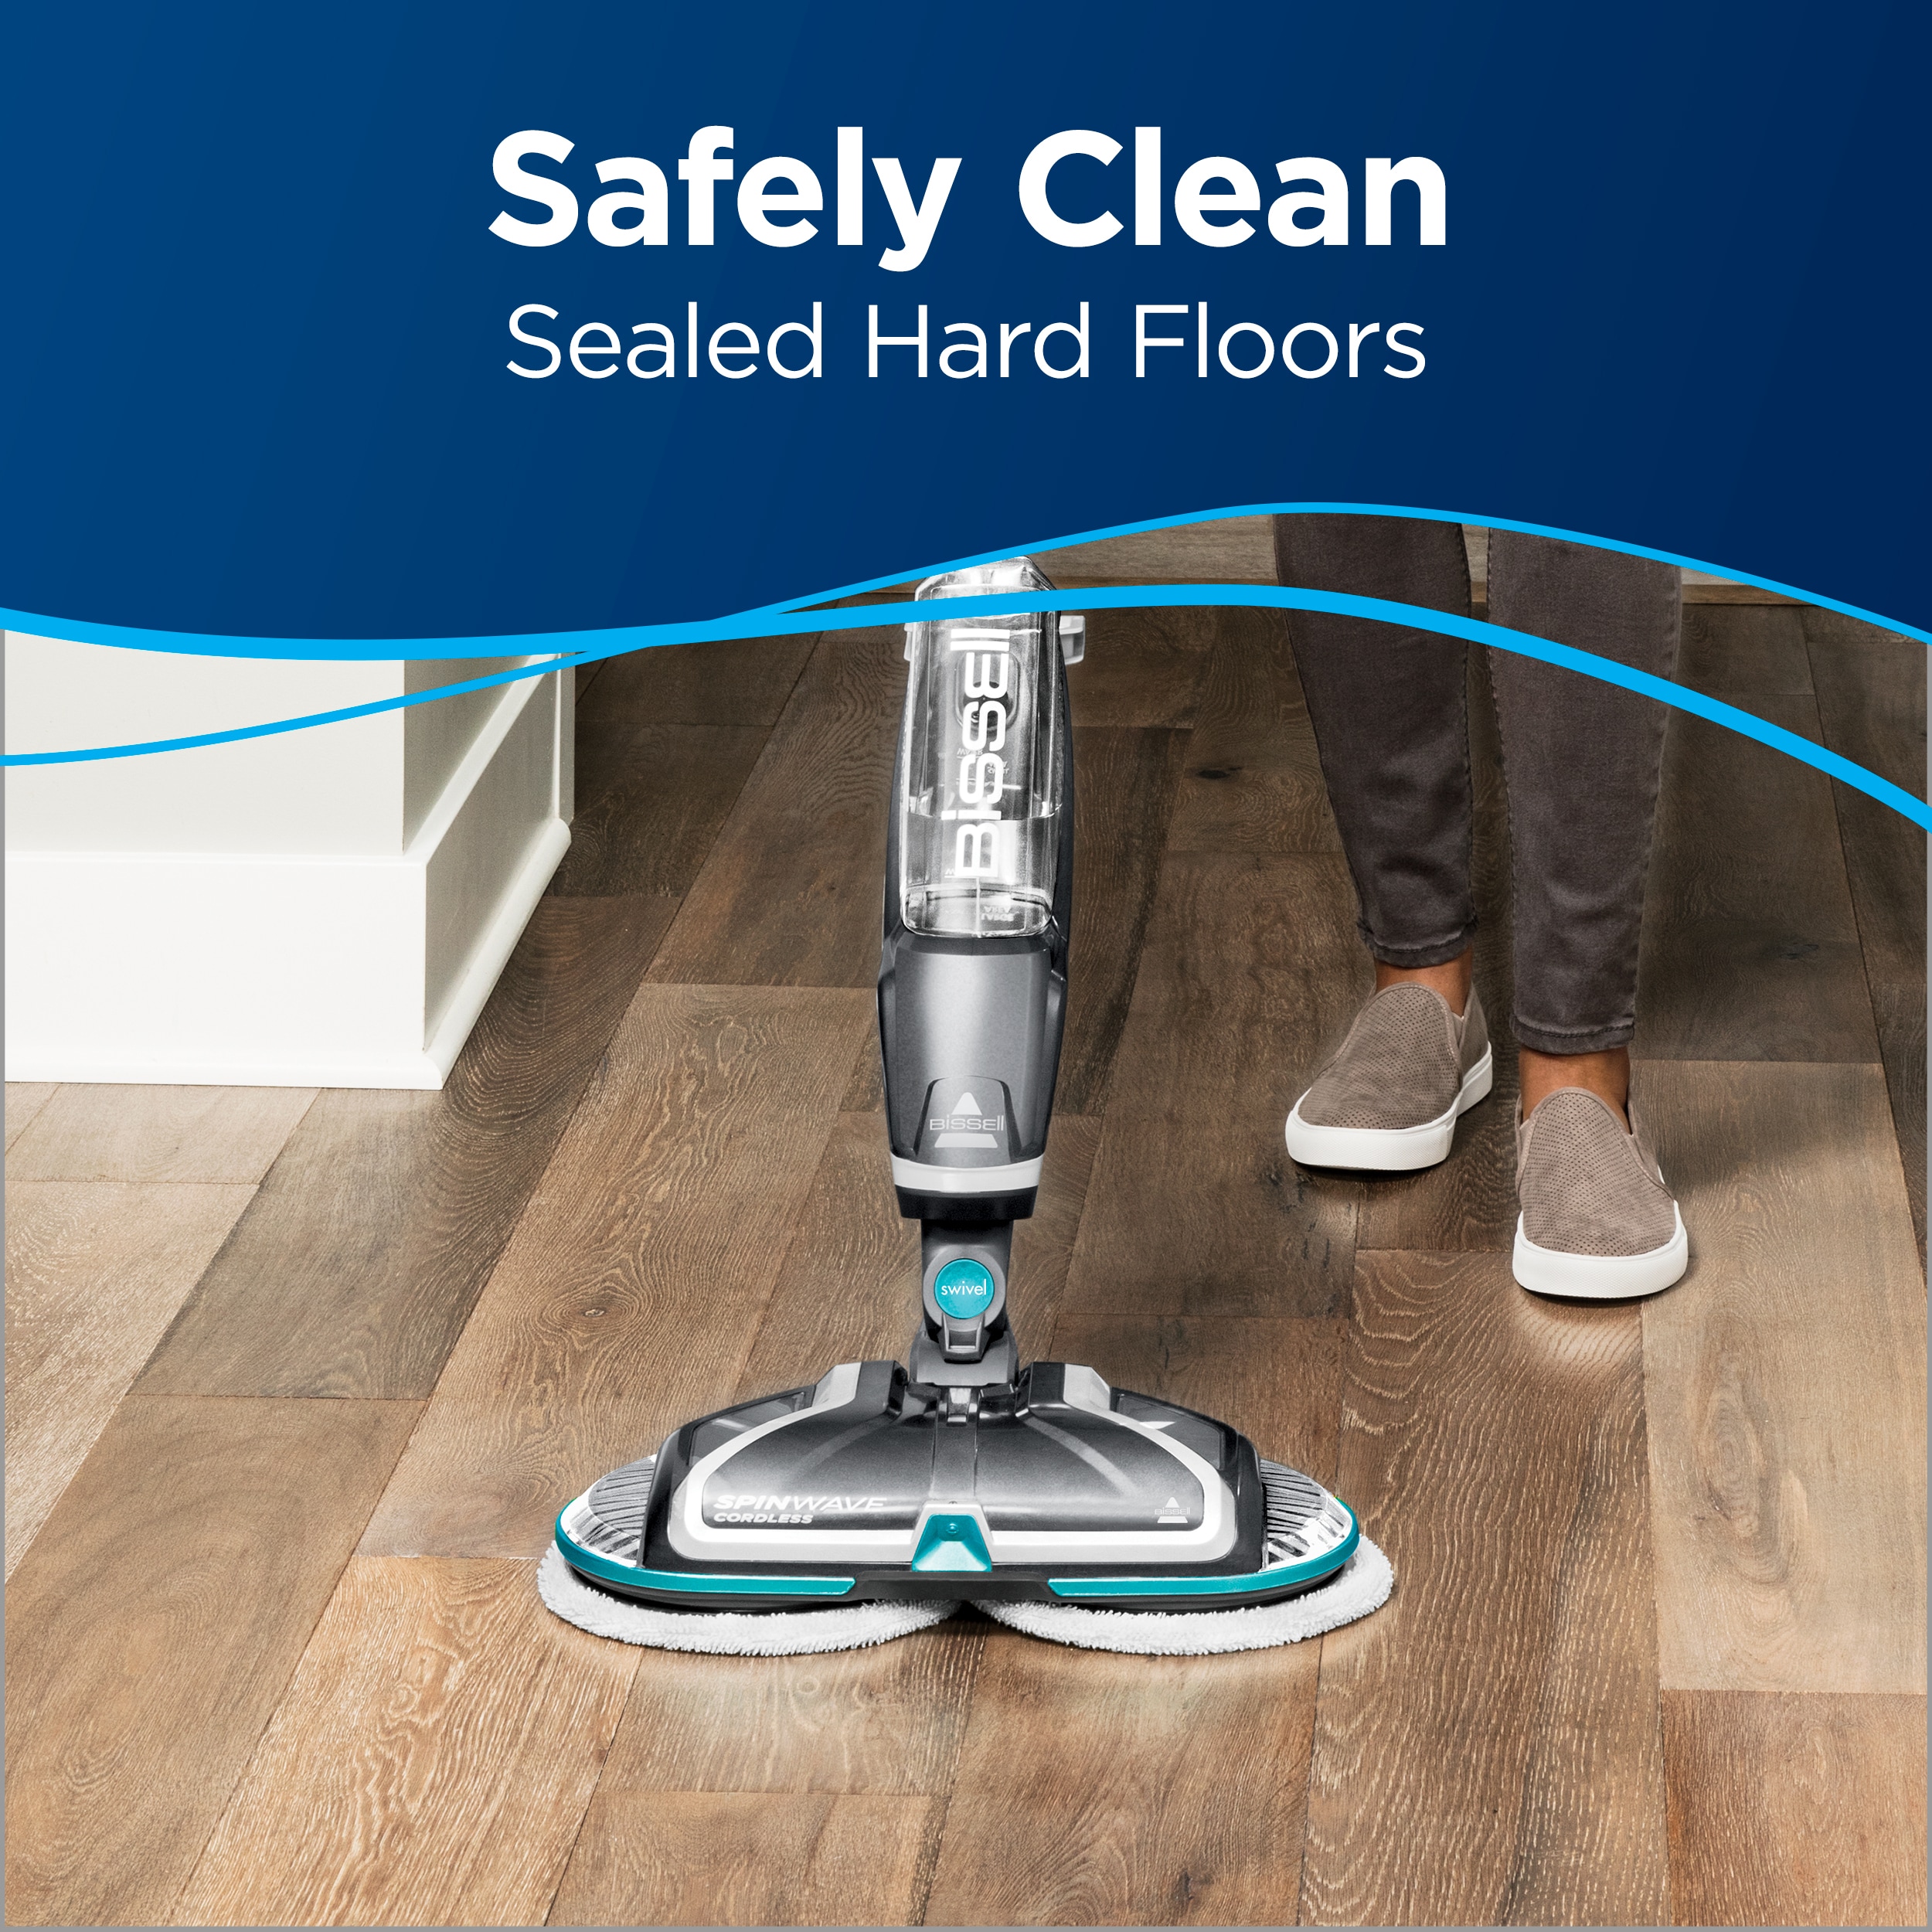 The Bissell Spinwave spin mop - Cleanup Expert's 2023 Review